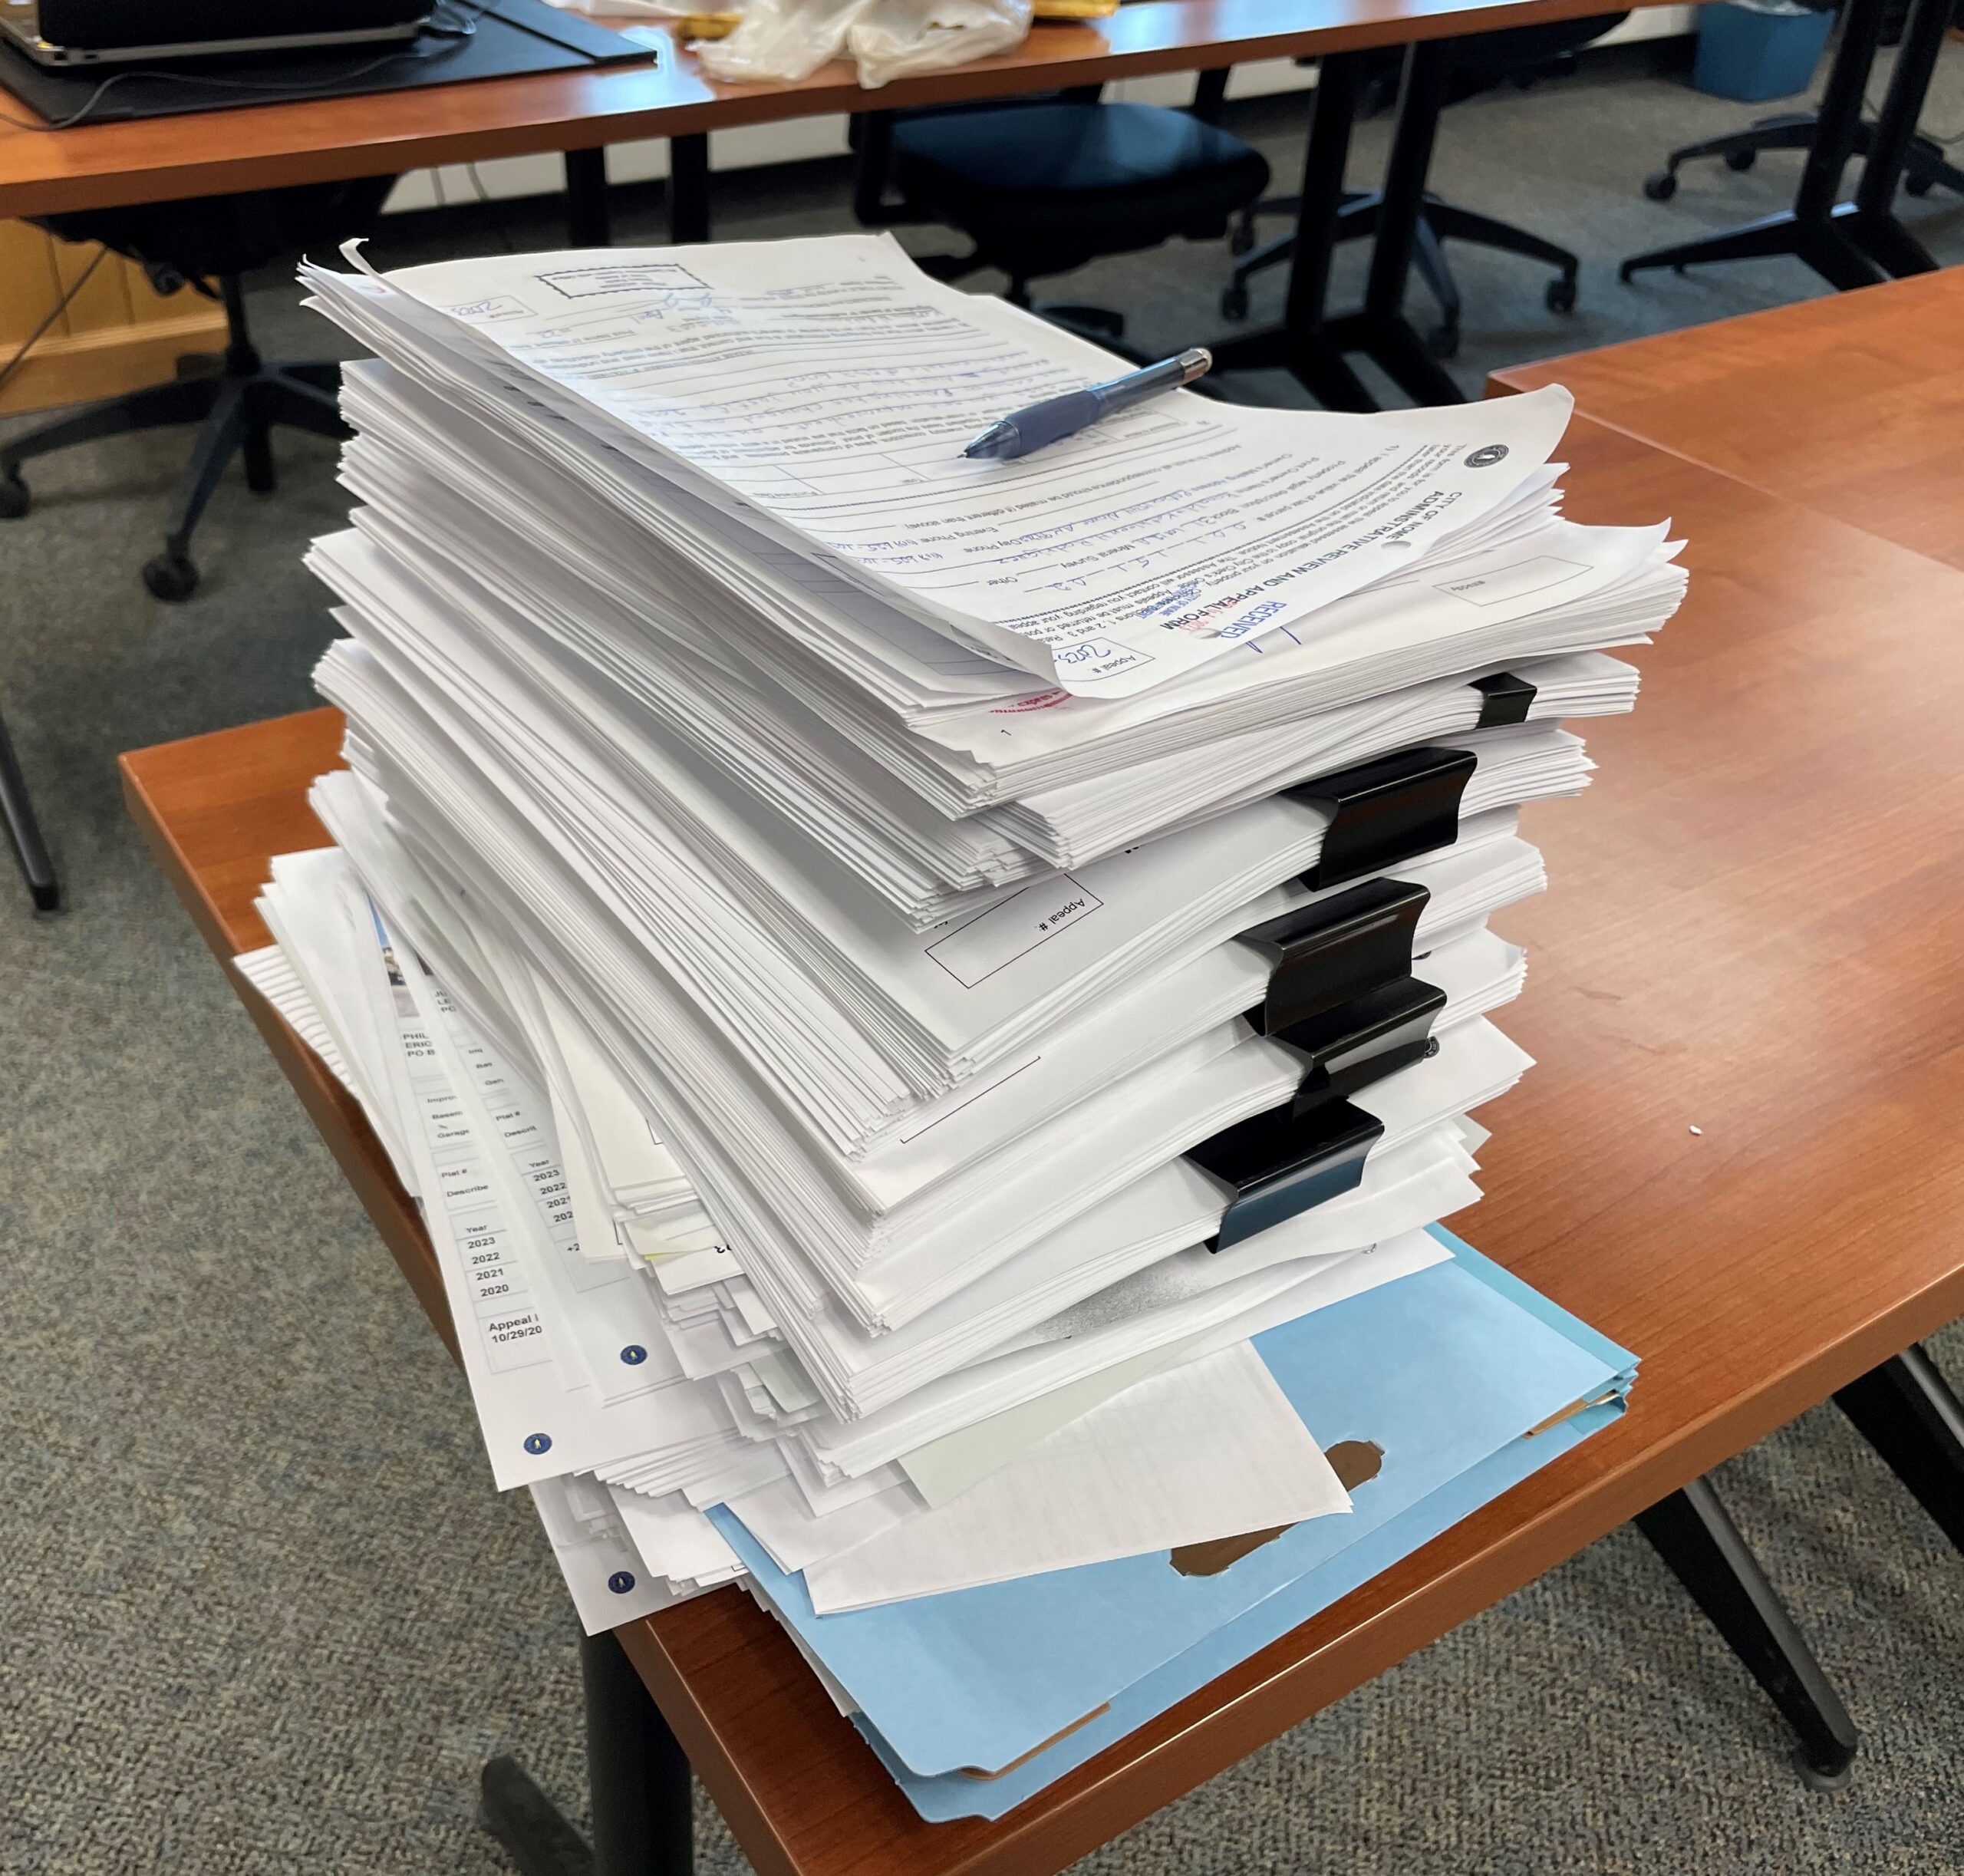 More than 1,000 pages of assessment appeals and supporting documentation are being reviewed by the city's assessors. Photo by Greg Knight/KNOM